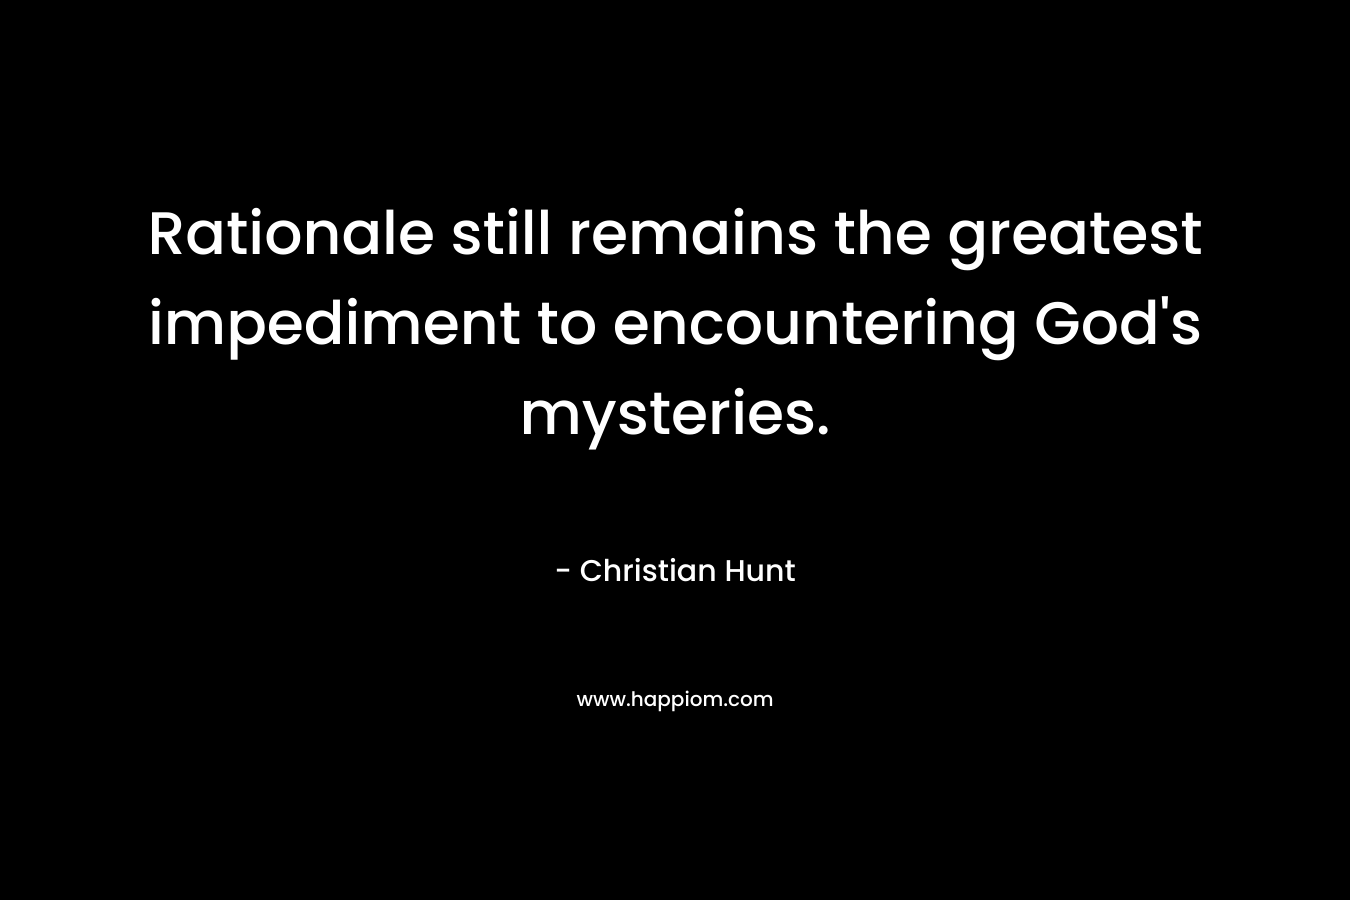 Rationale still remains the greatest impediment to encountering God’s mysteries. – Christian Hunt